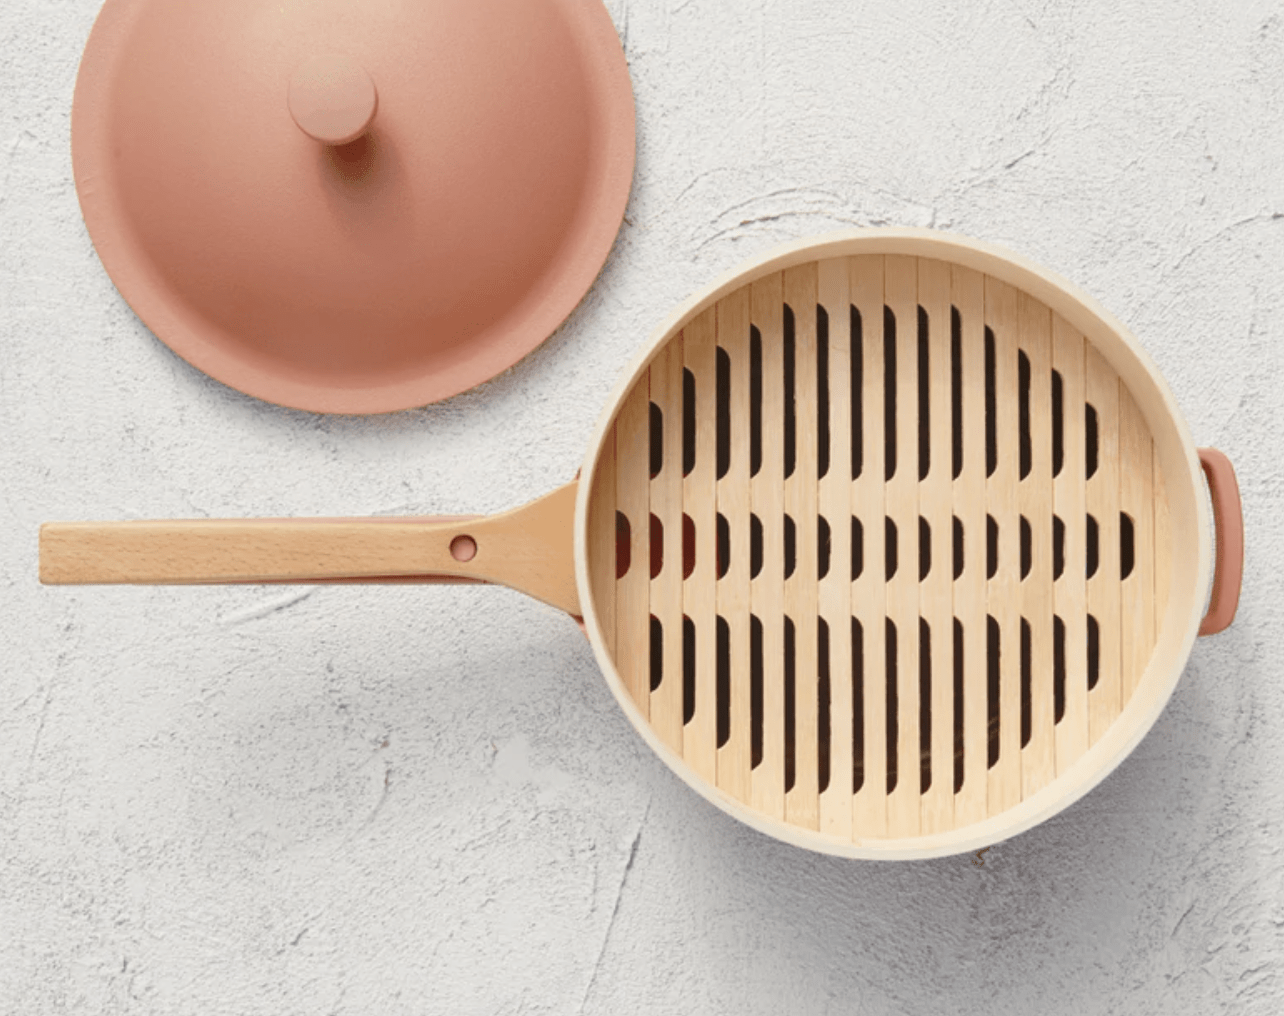 Our Place sale: Shop spring cookware deals of up to 25% off